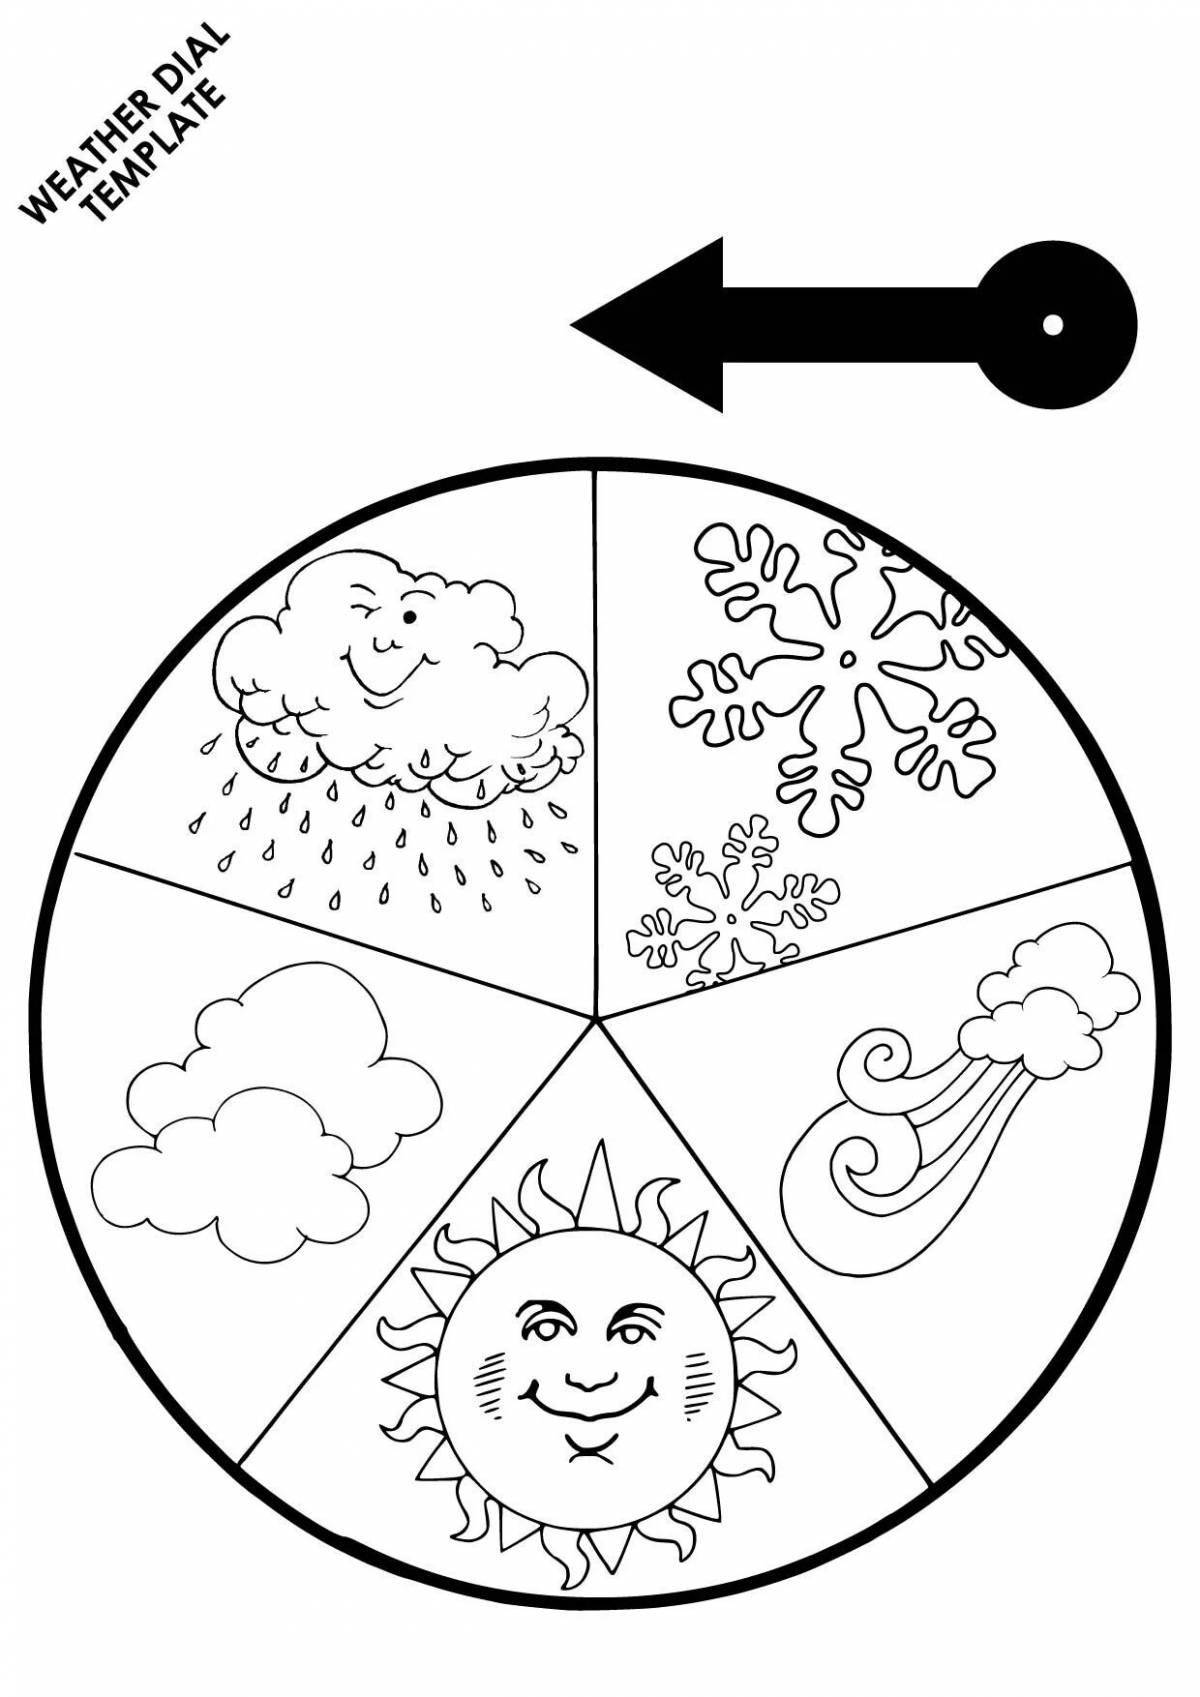 Colorful weather coloring page for kids